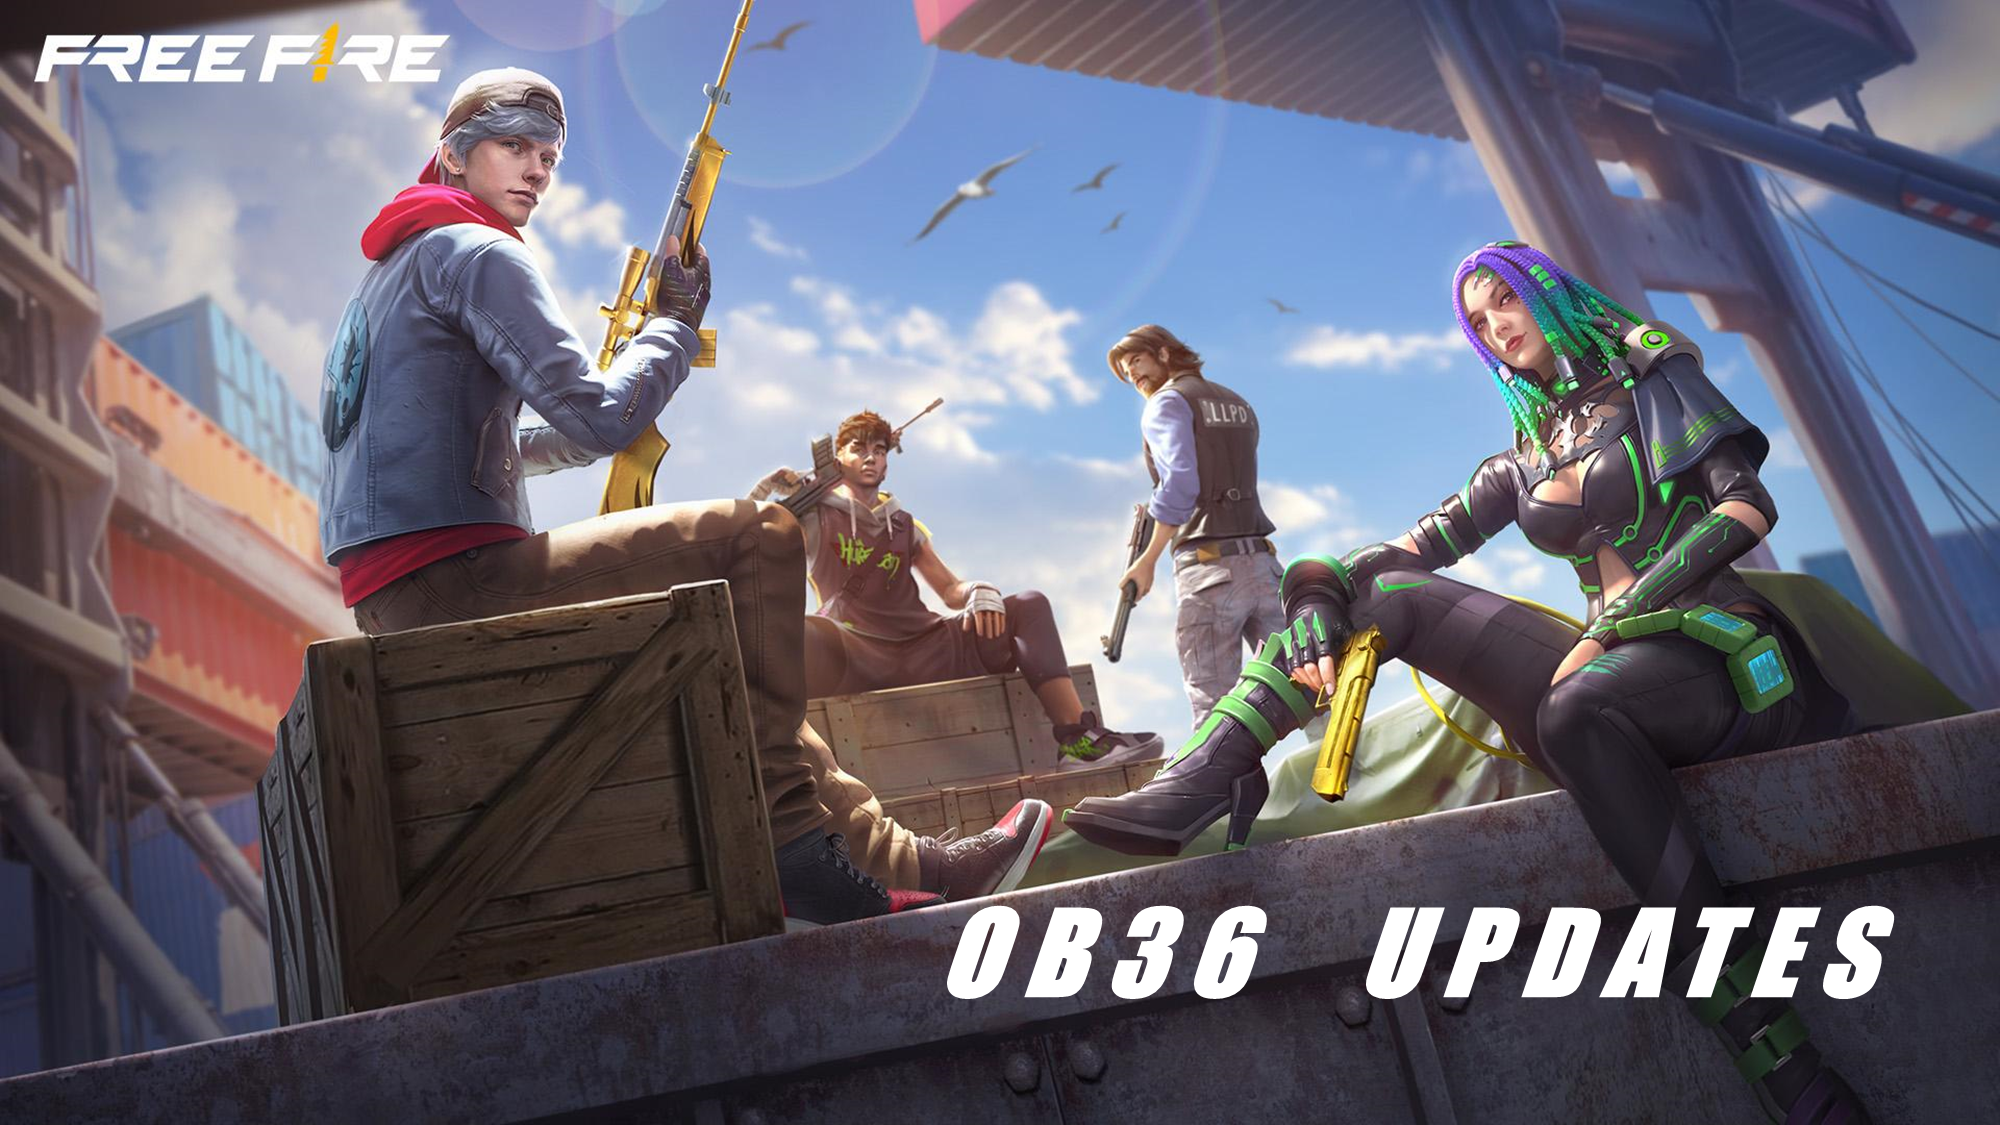 Free Fire OB36 Early Patch Notes image